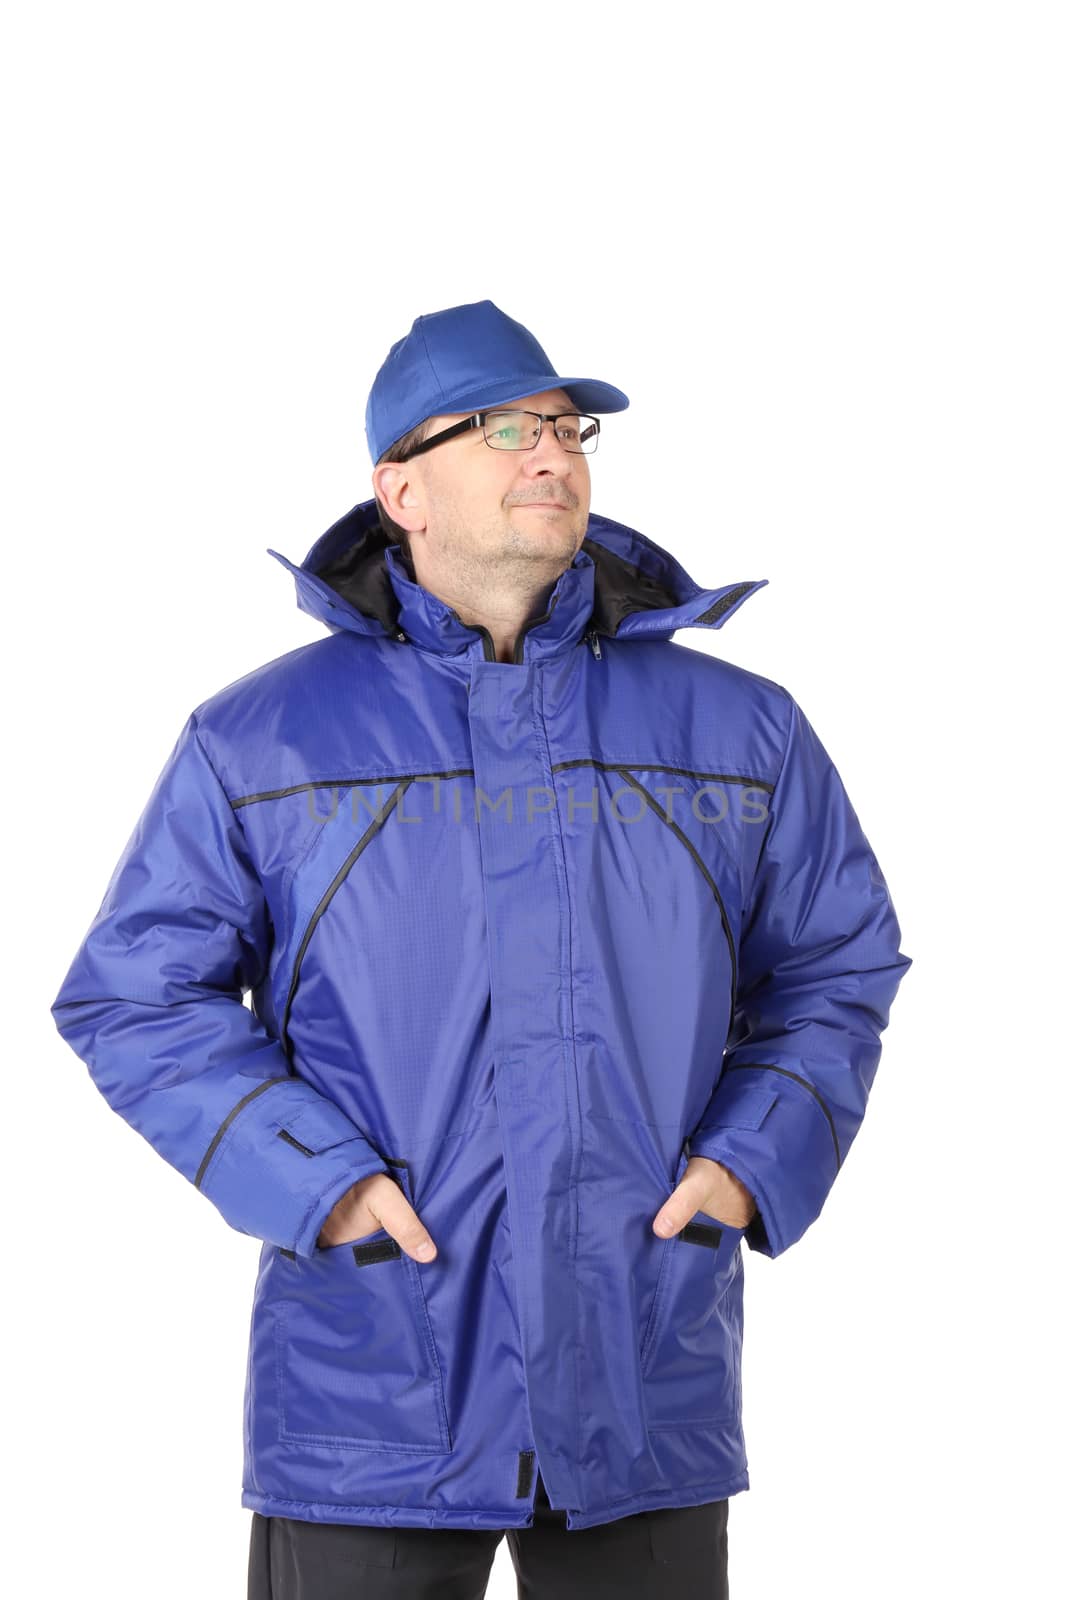 Worker in blue workwear. Isolated on a white background.